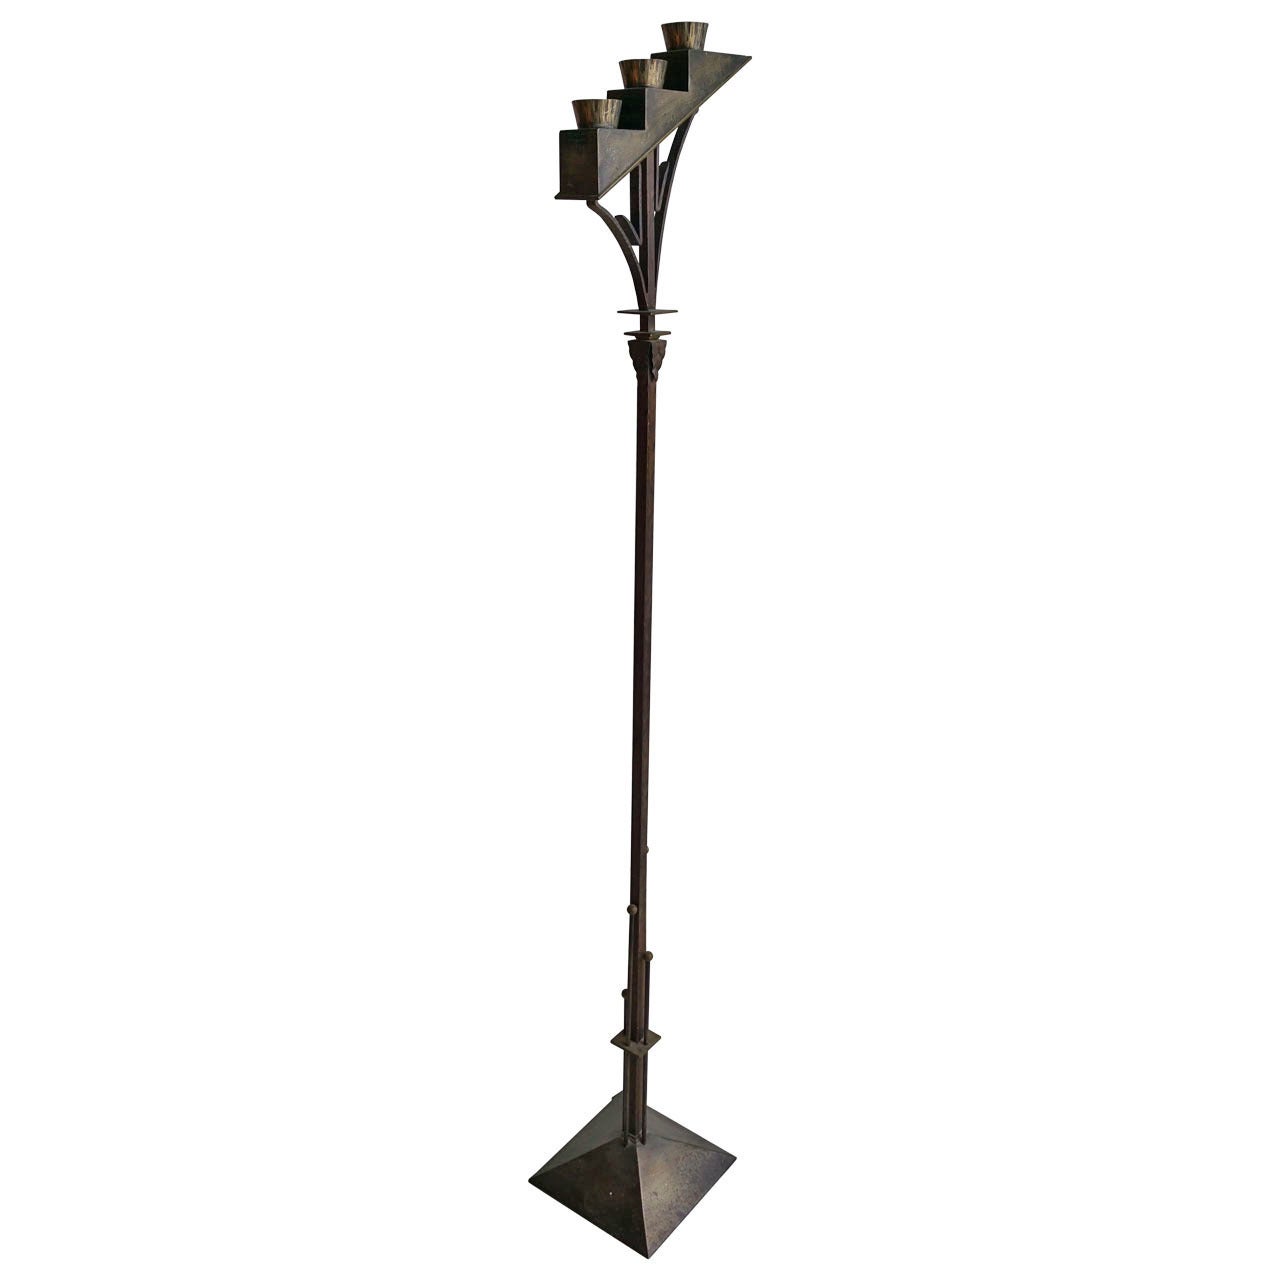 Stylized Art Deco Floor Lamp in Bronzed Metal by Almco Lamp Co. For Sale